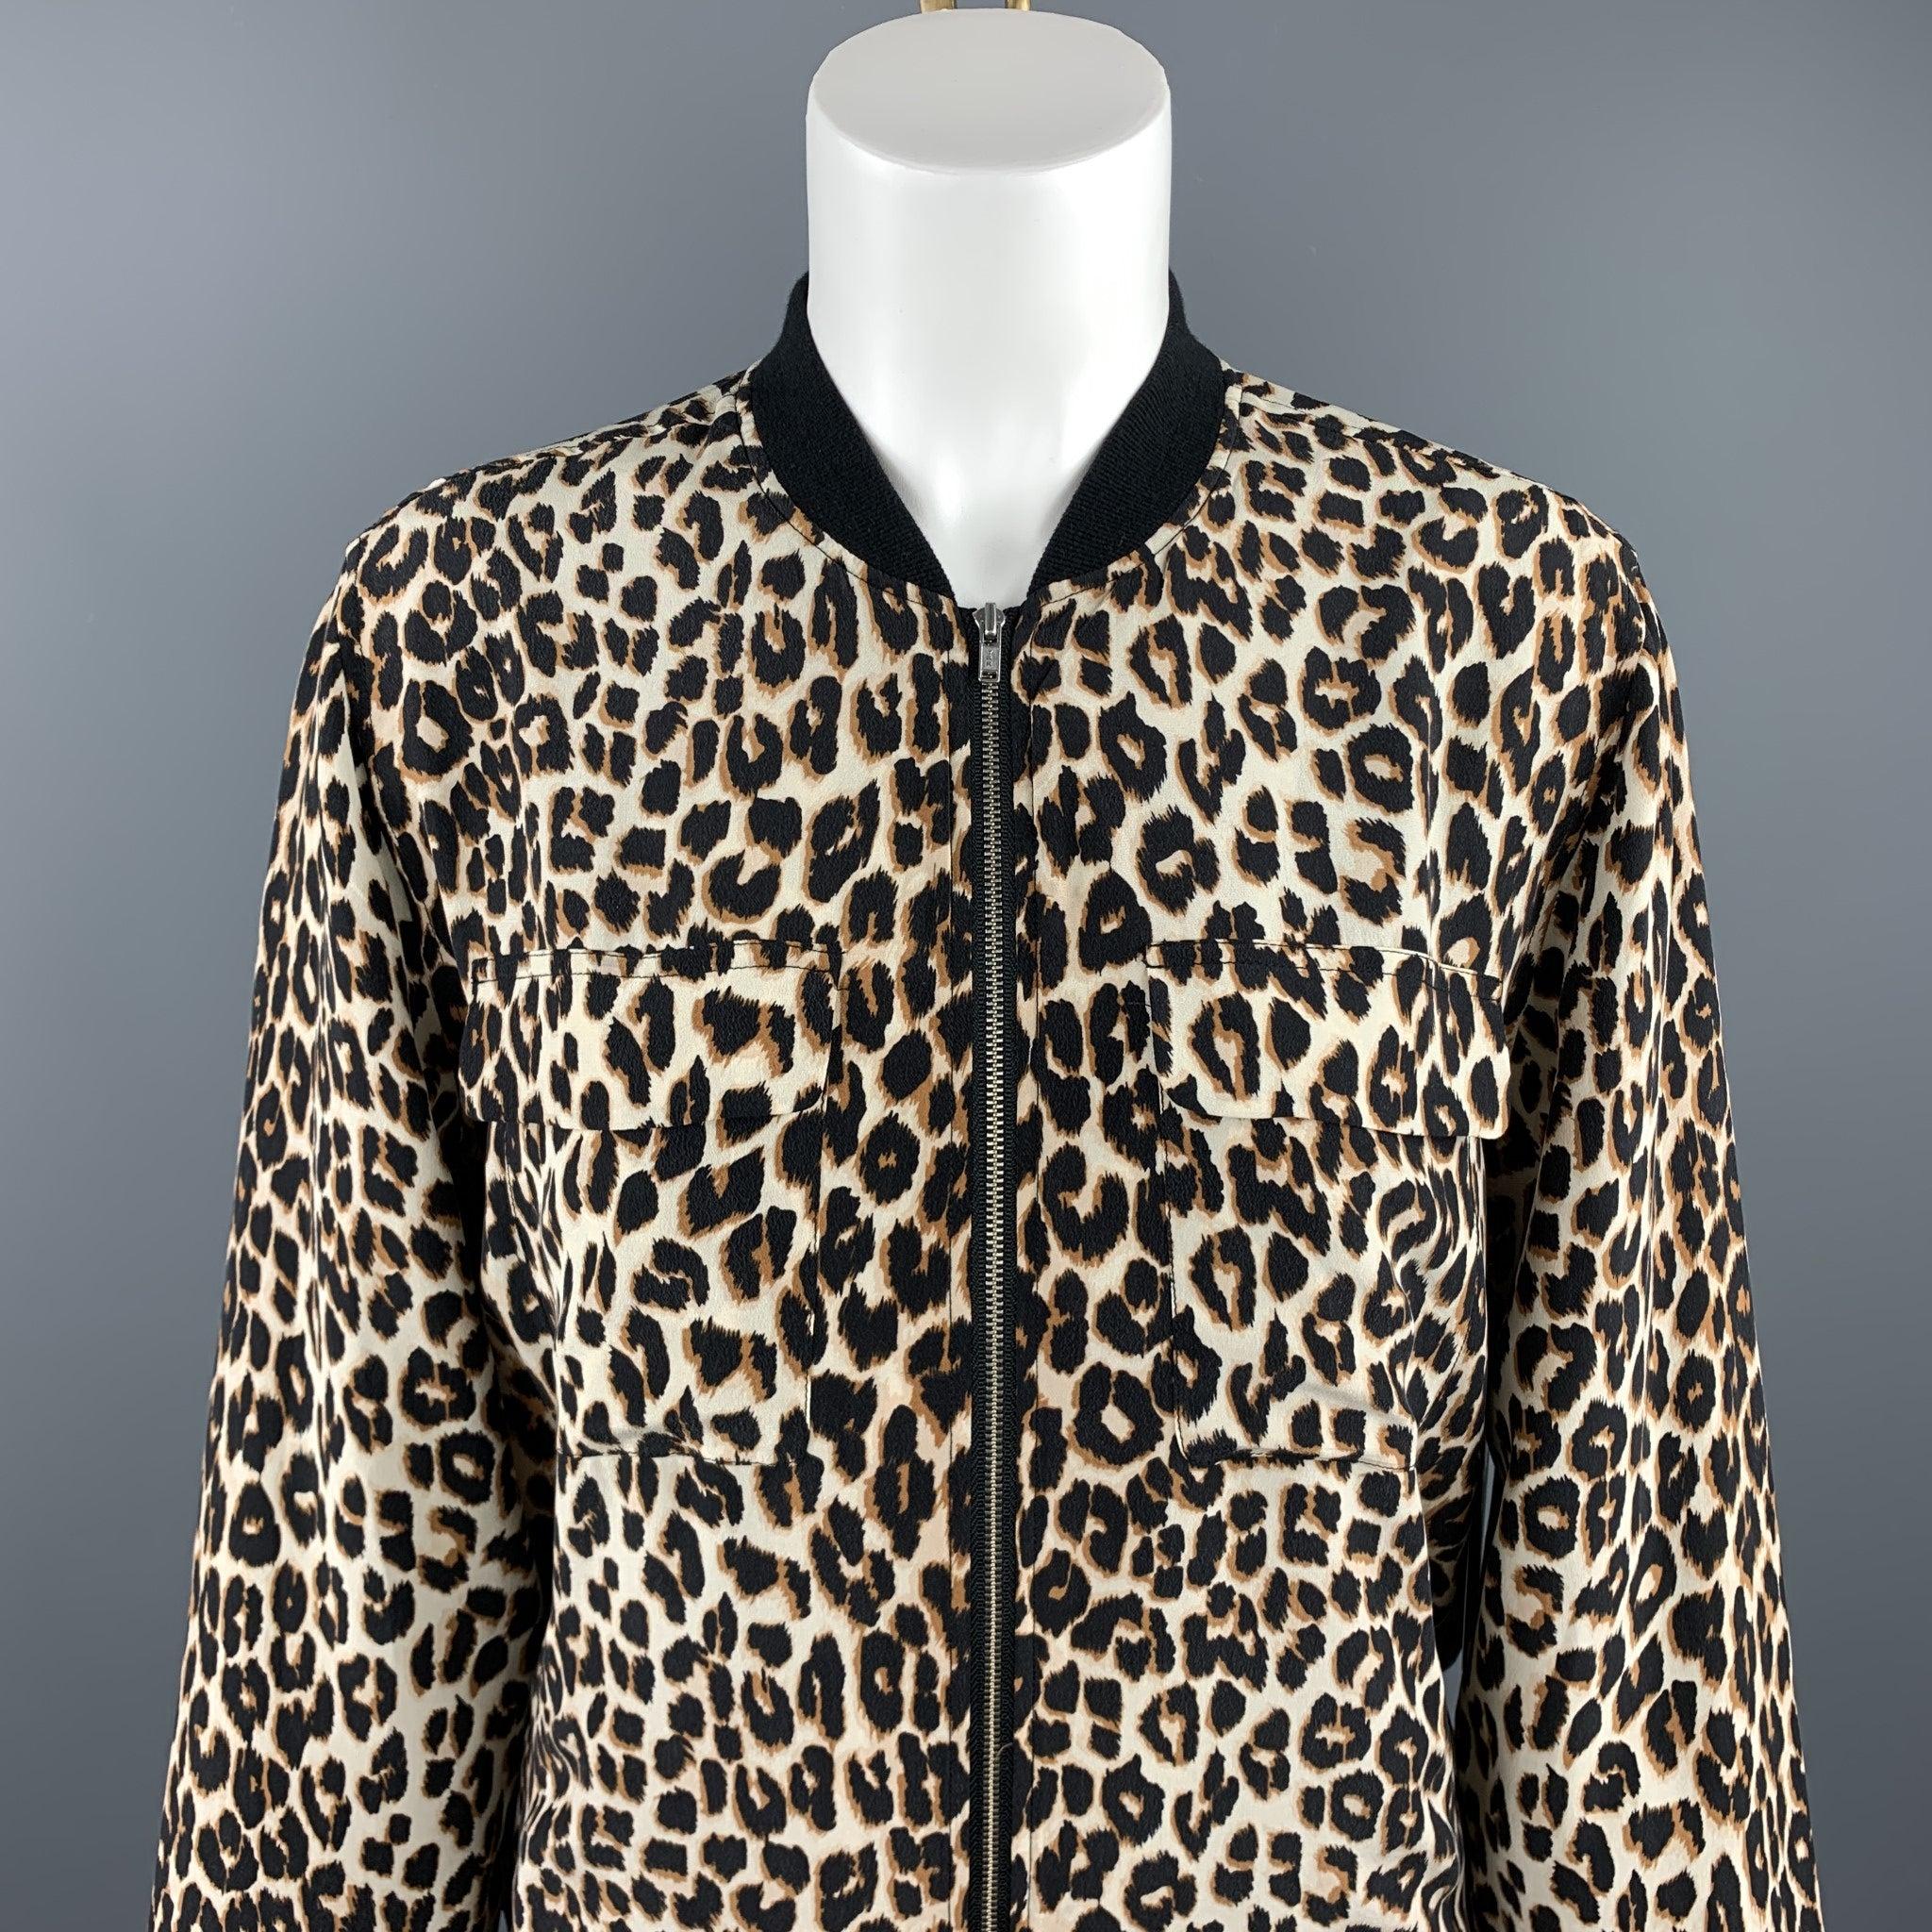 EQUIPMENT FEMME jacket comes in a black & tan leopard silk featuring a bomber style, patch pockets, and a zip up closure. Excellent Pre-Owned Condition. 

Marked:   XS 

Measurements: 
 
Shoulder: 16 inches 
Bust: 36 inches 
Sleeve: 24.5 inches